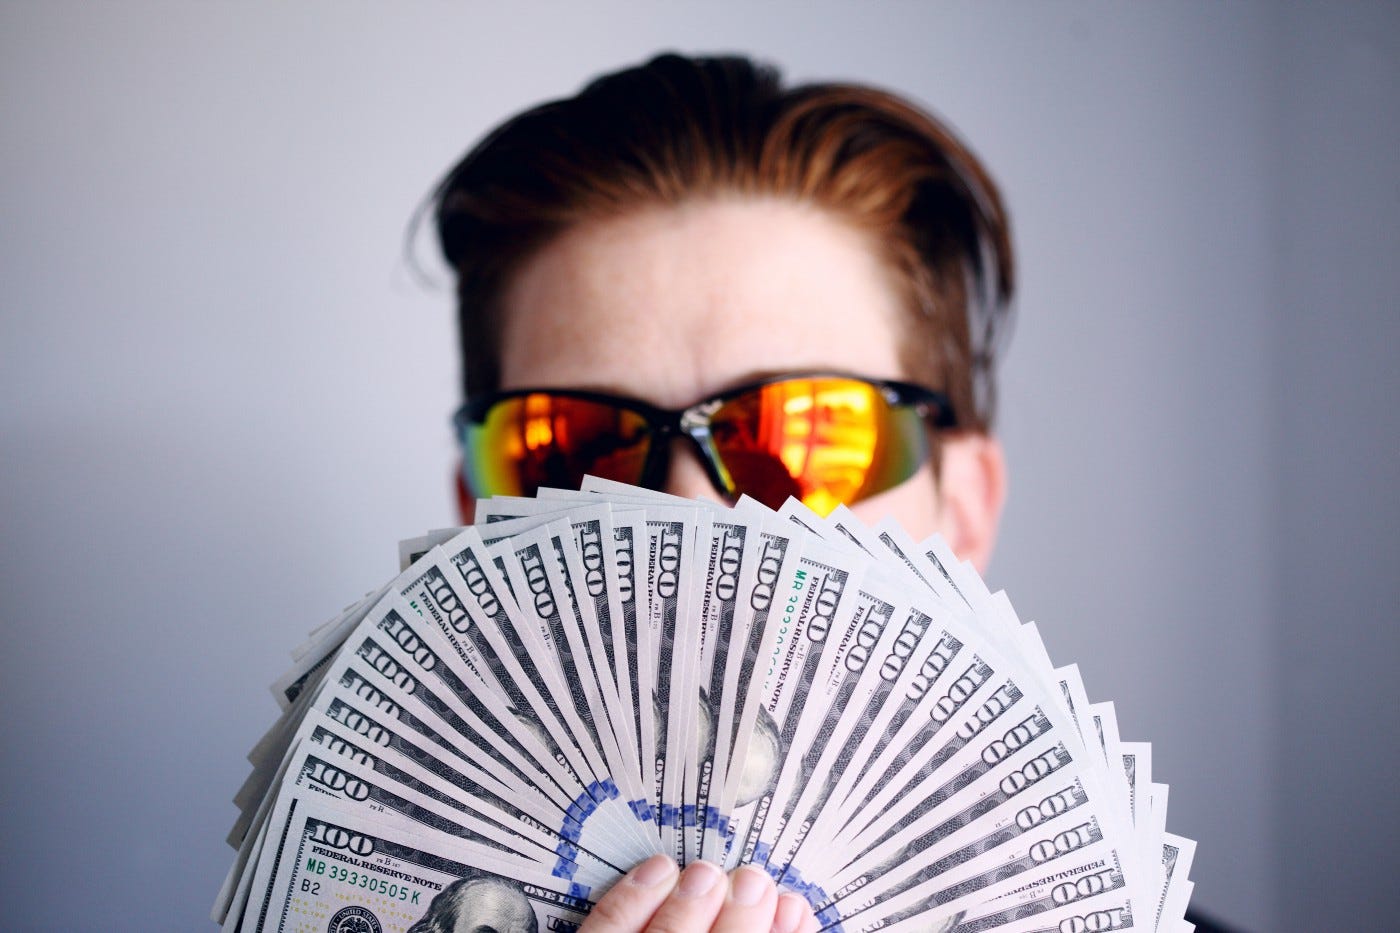 Man with sunglasses on holding money